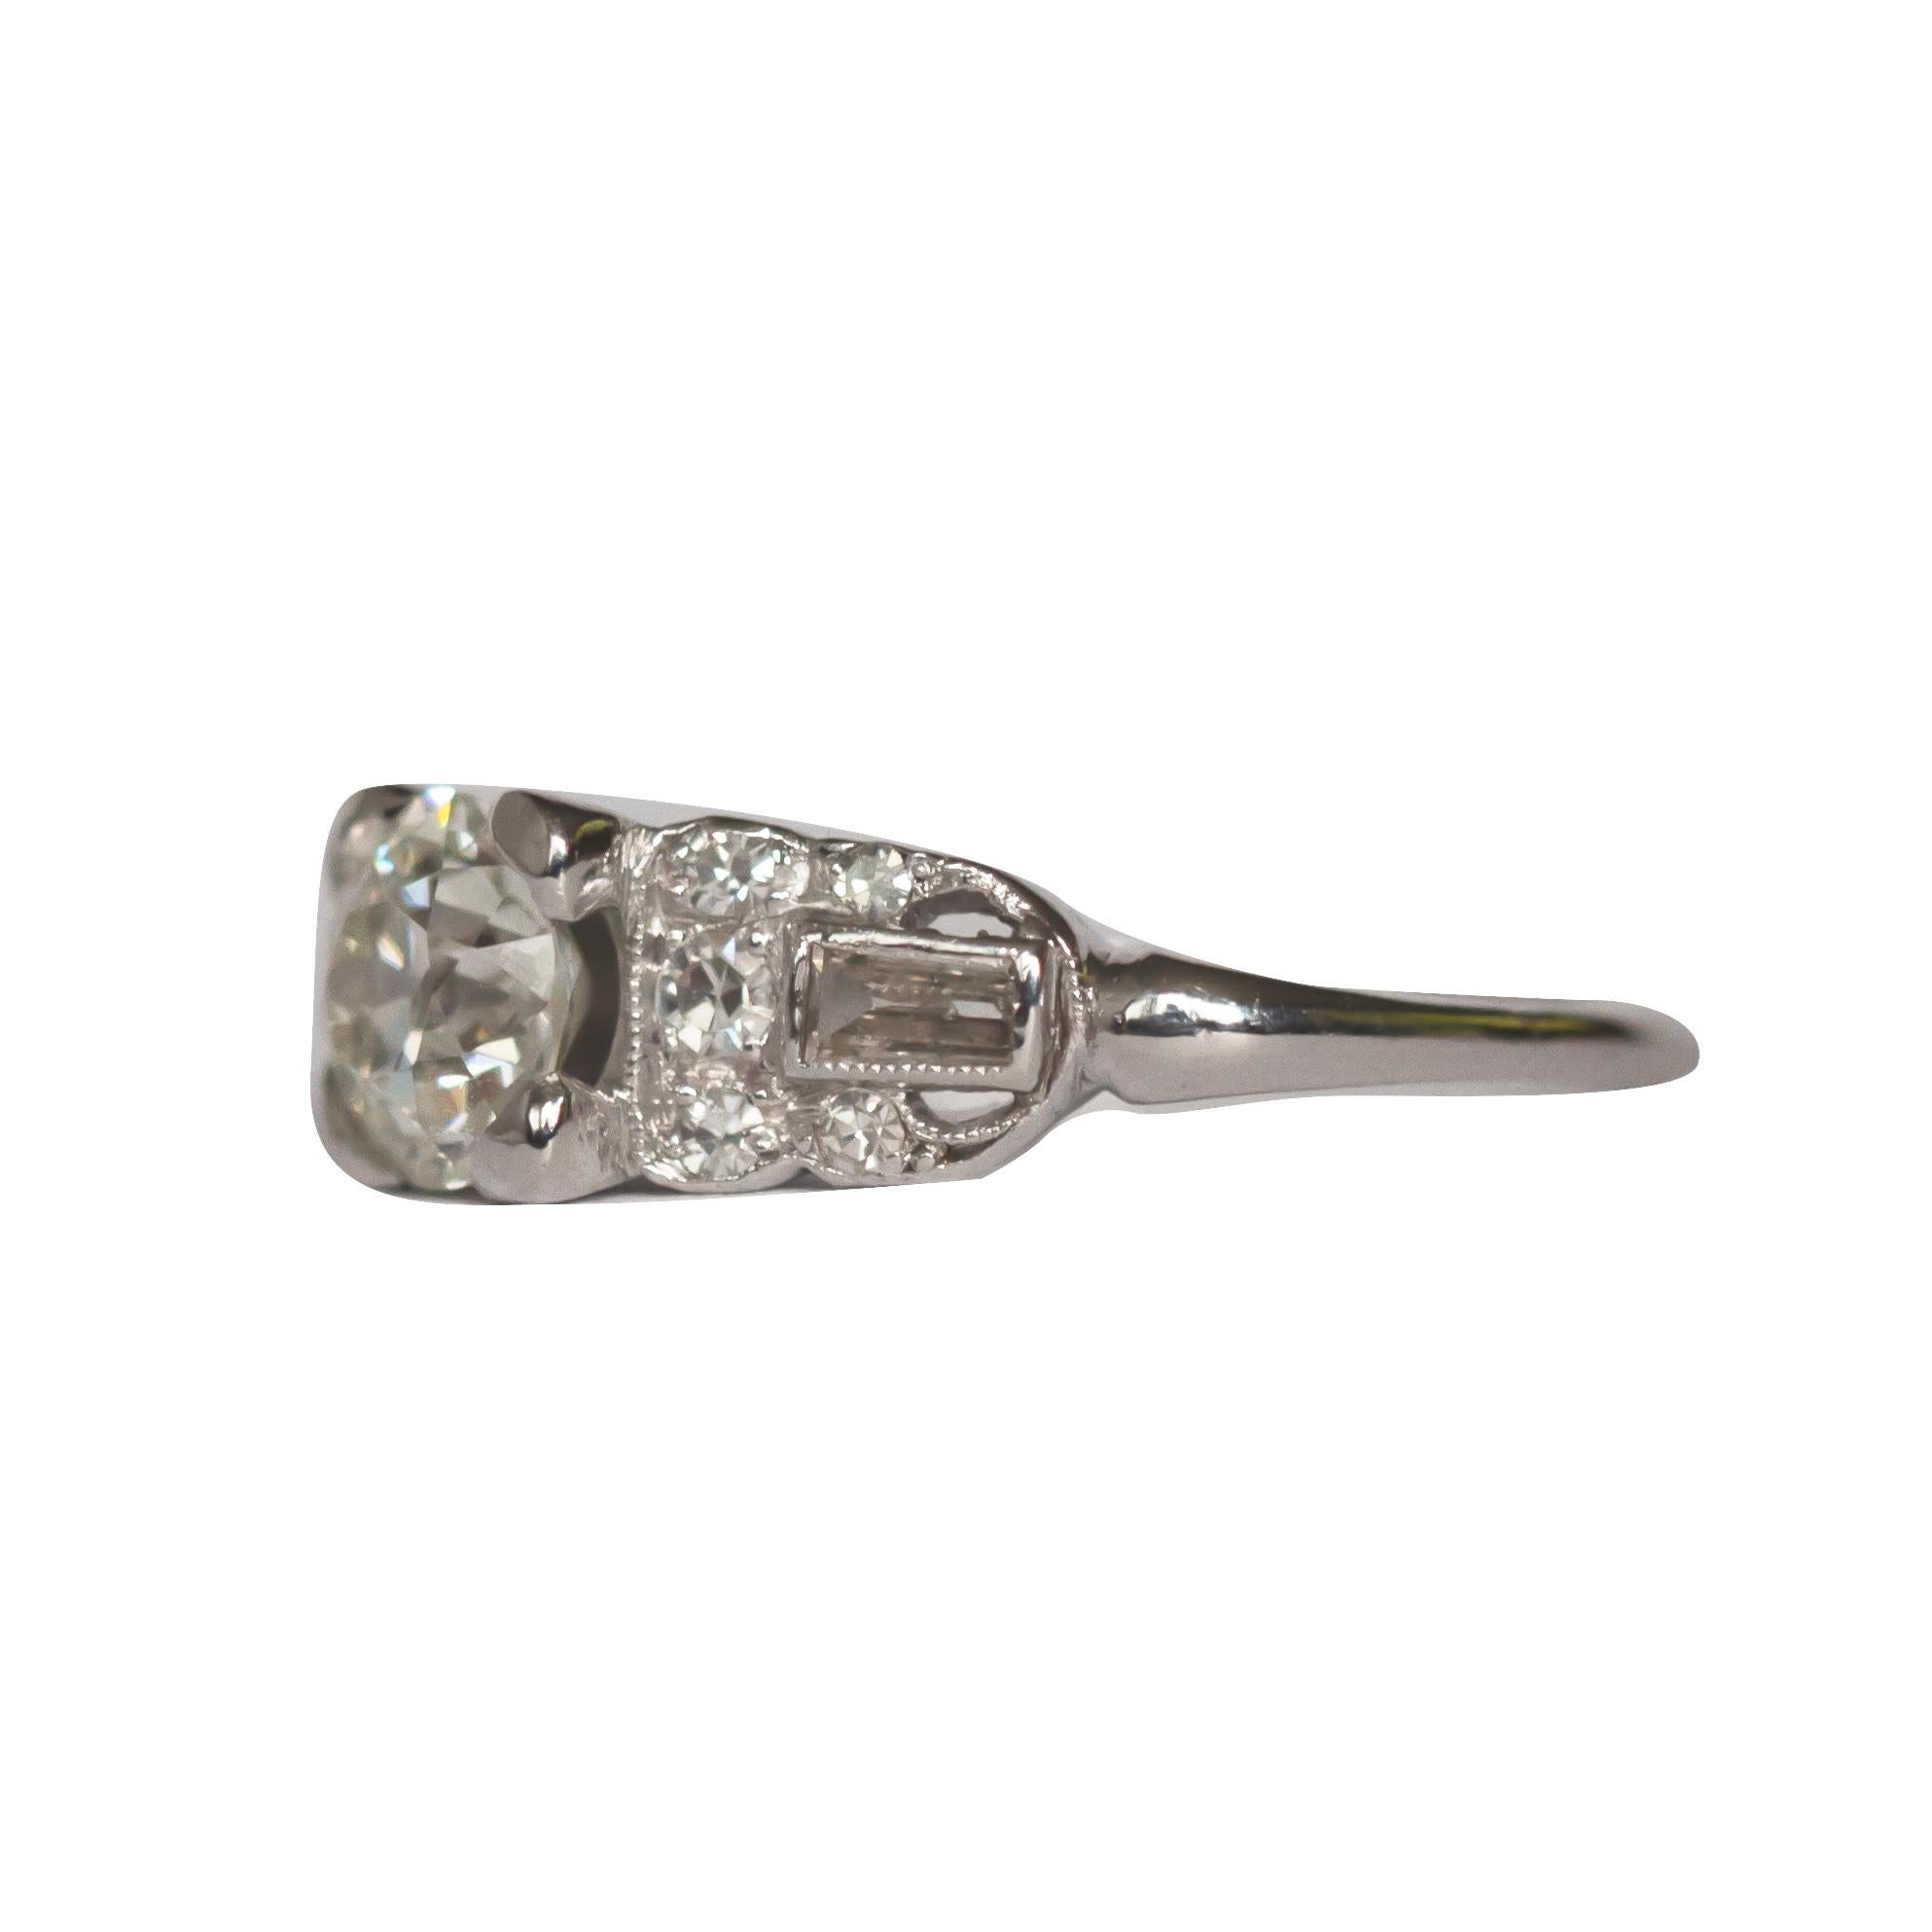 Ring Size: 6.25
Metal Type: Platinum [Hallmarked, and Tested]
Weight:  3.9 grams

Center Diamond Details:
GIA REPORT#2215013608
Weight: .89 carat
Cut: Old European Brilliant
Color: I 
Clarity: VS1

Side Diamond Details:
Weight: .25 carat, total